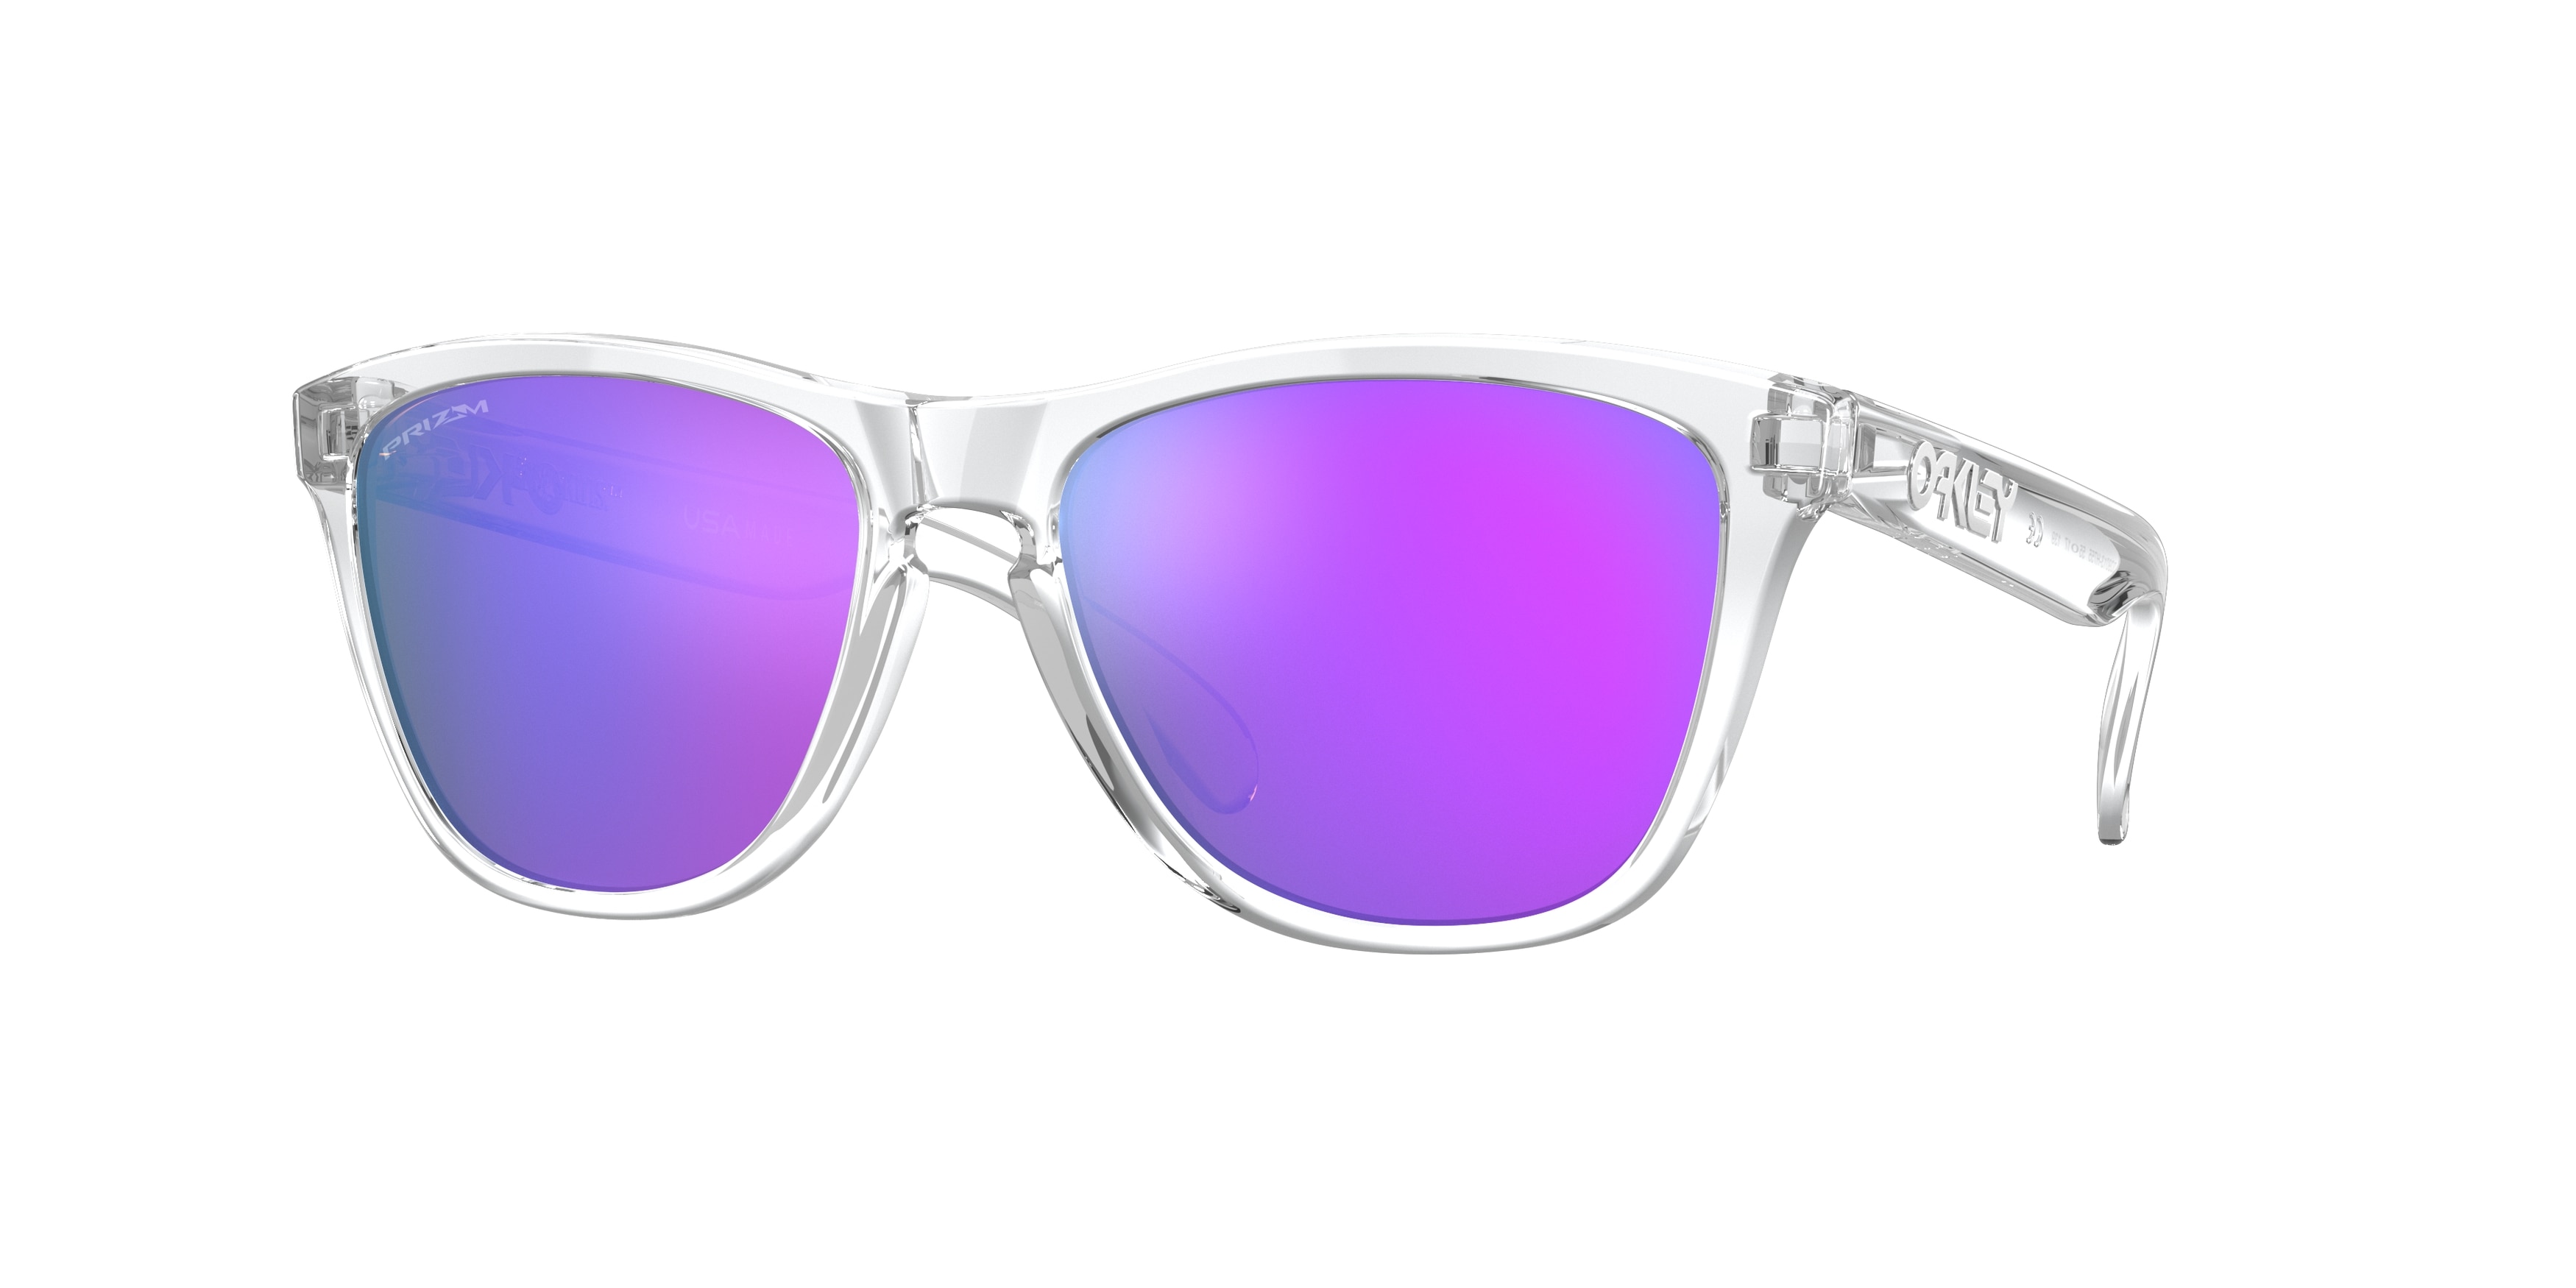 oakley_0oo9013_9013h7_polished_clear_ref